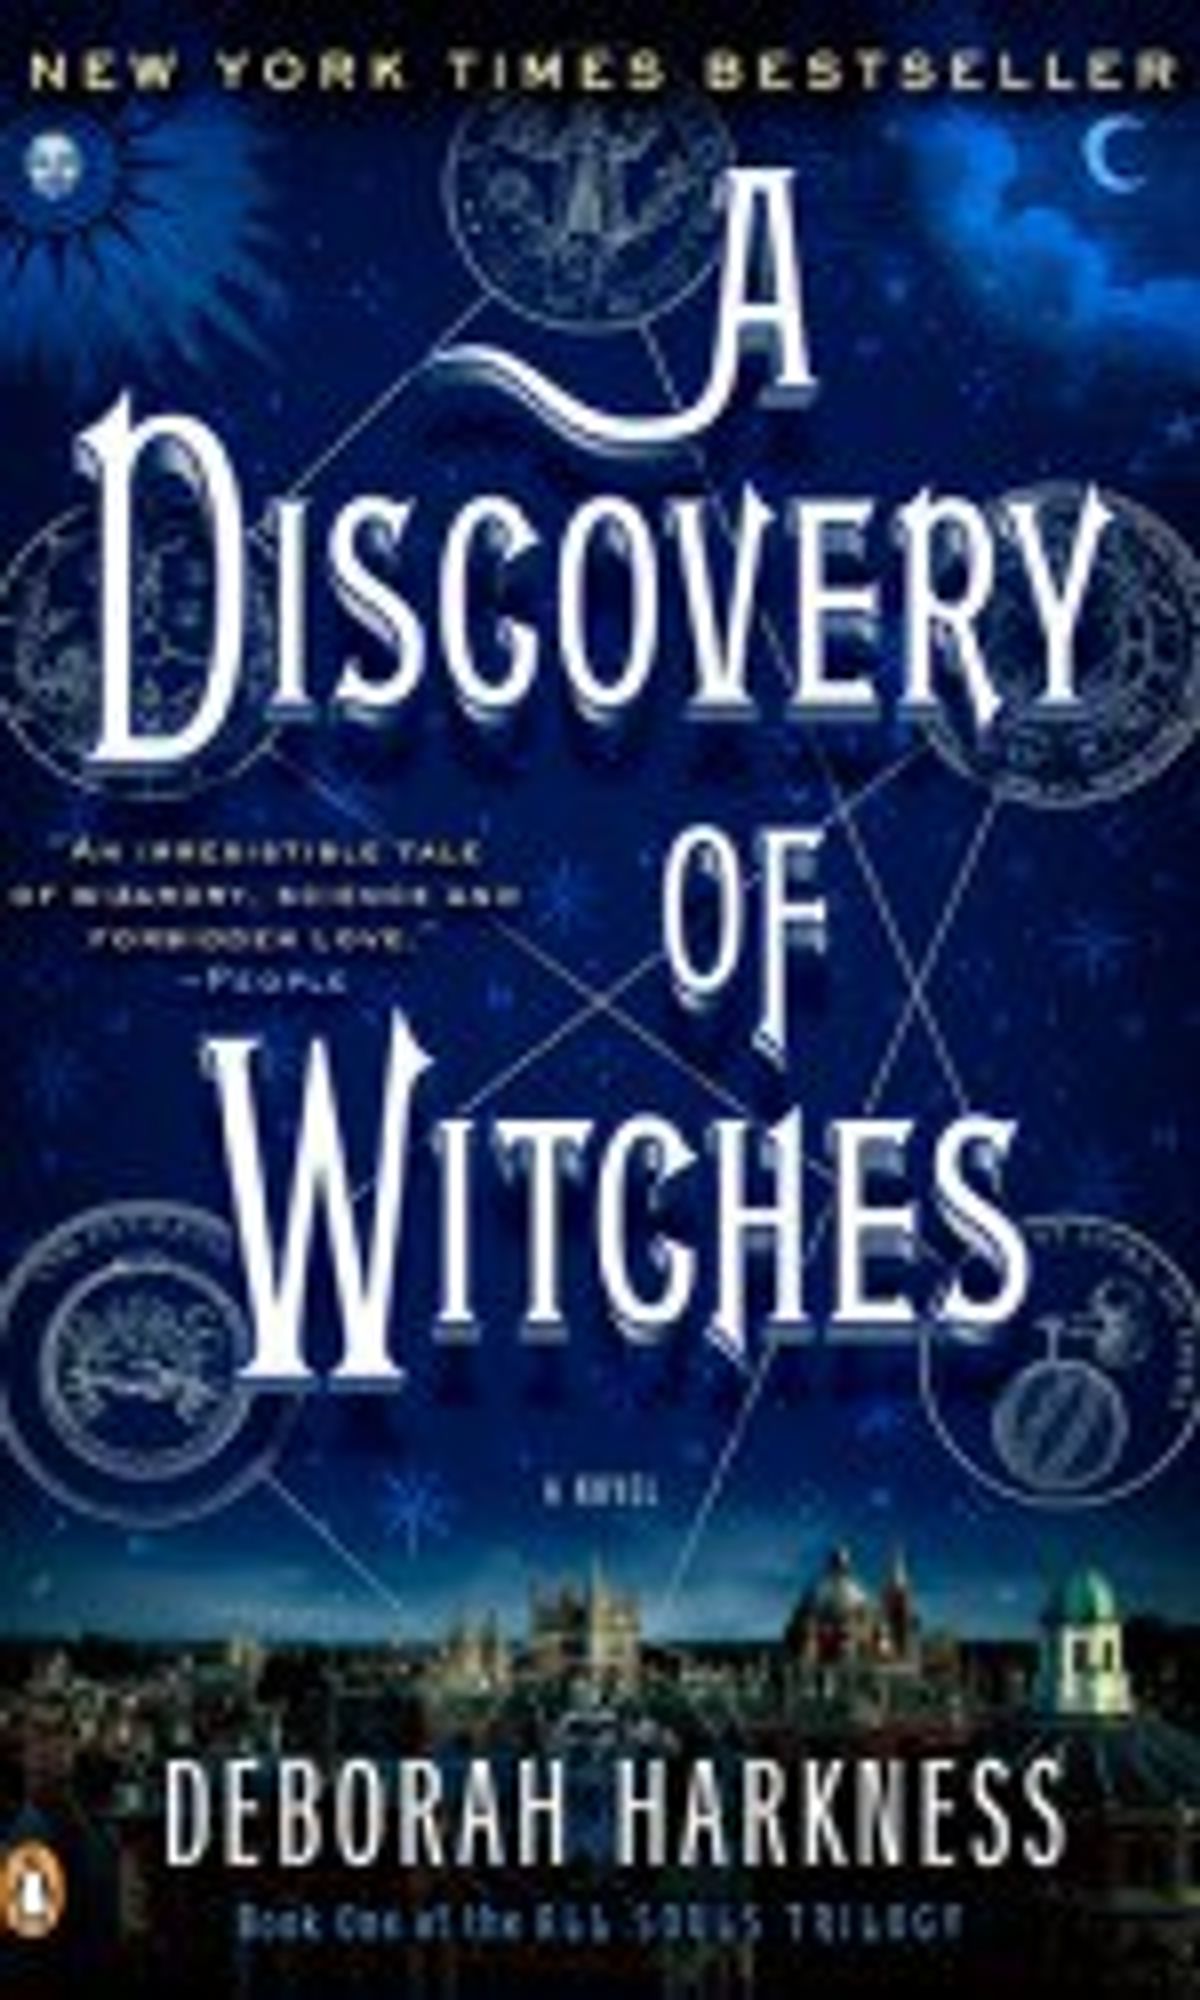 Book Review: "A Discovery of Witches"